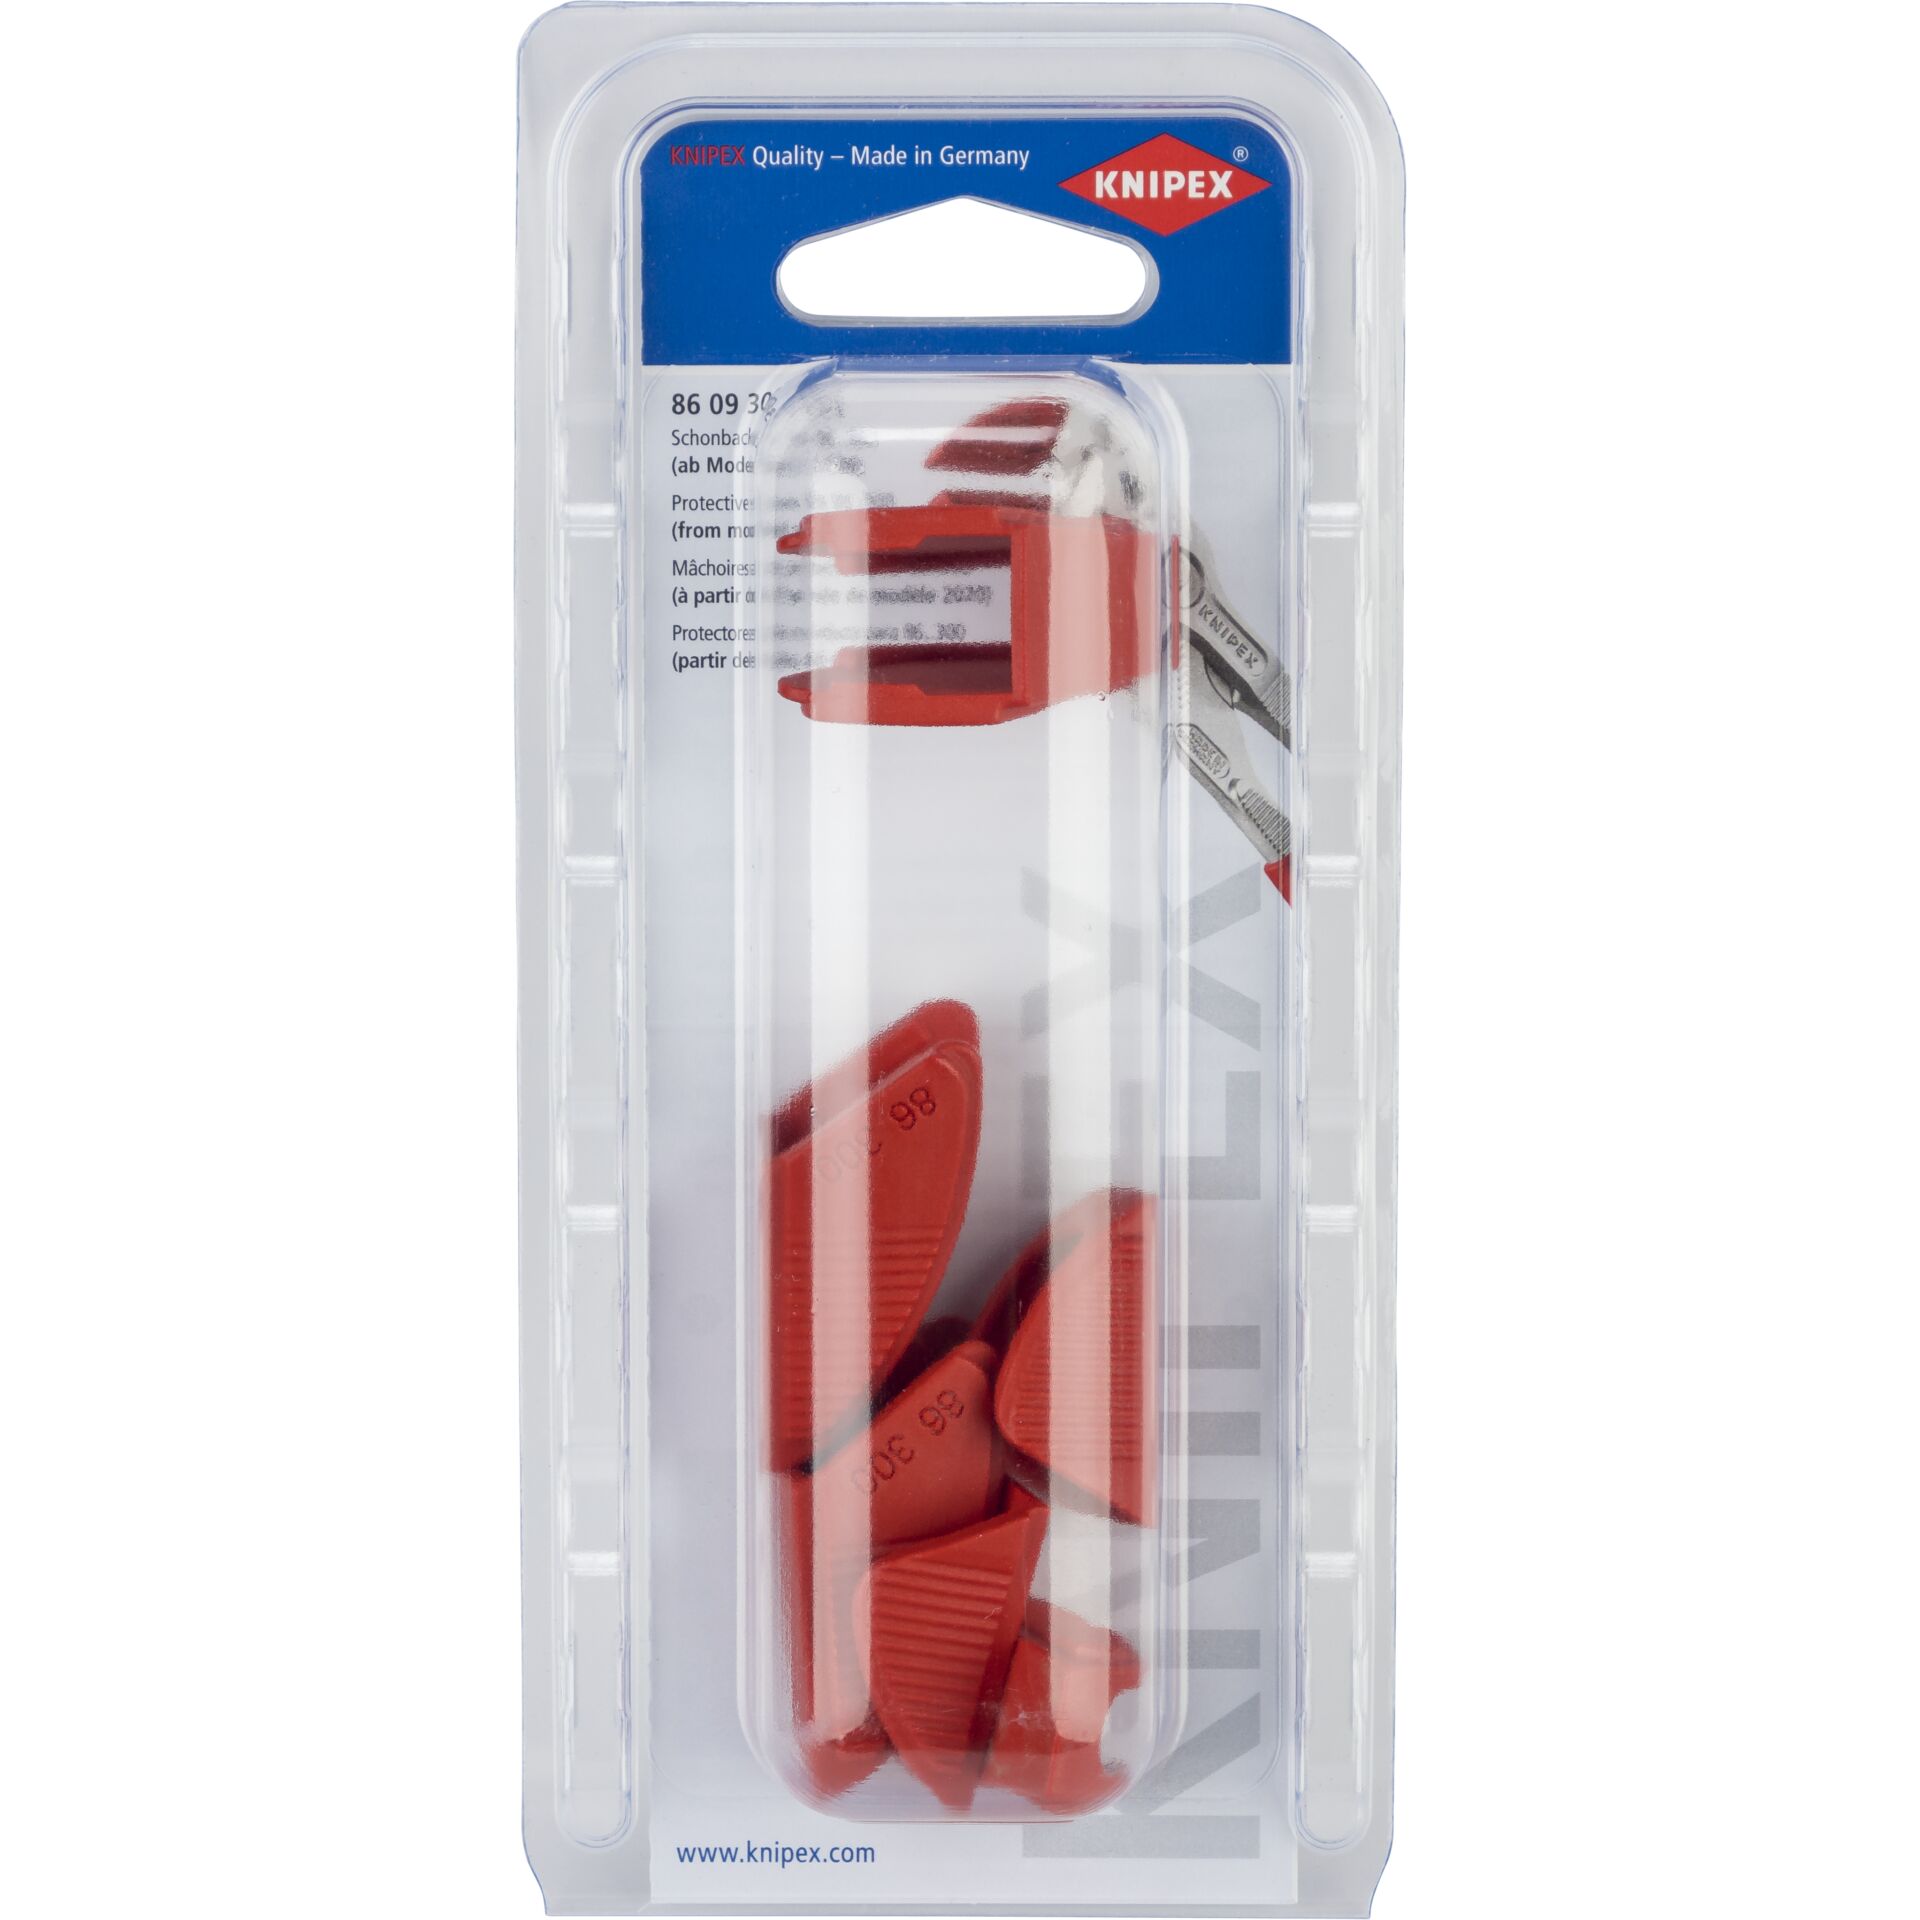 KNIPEX Protective Jaws 86 xx 300 (3 Pairs)